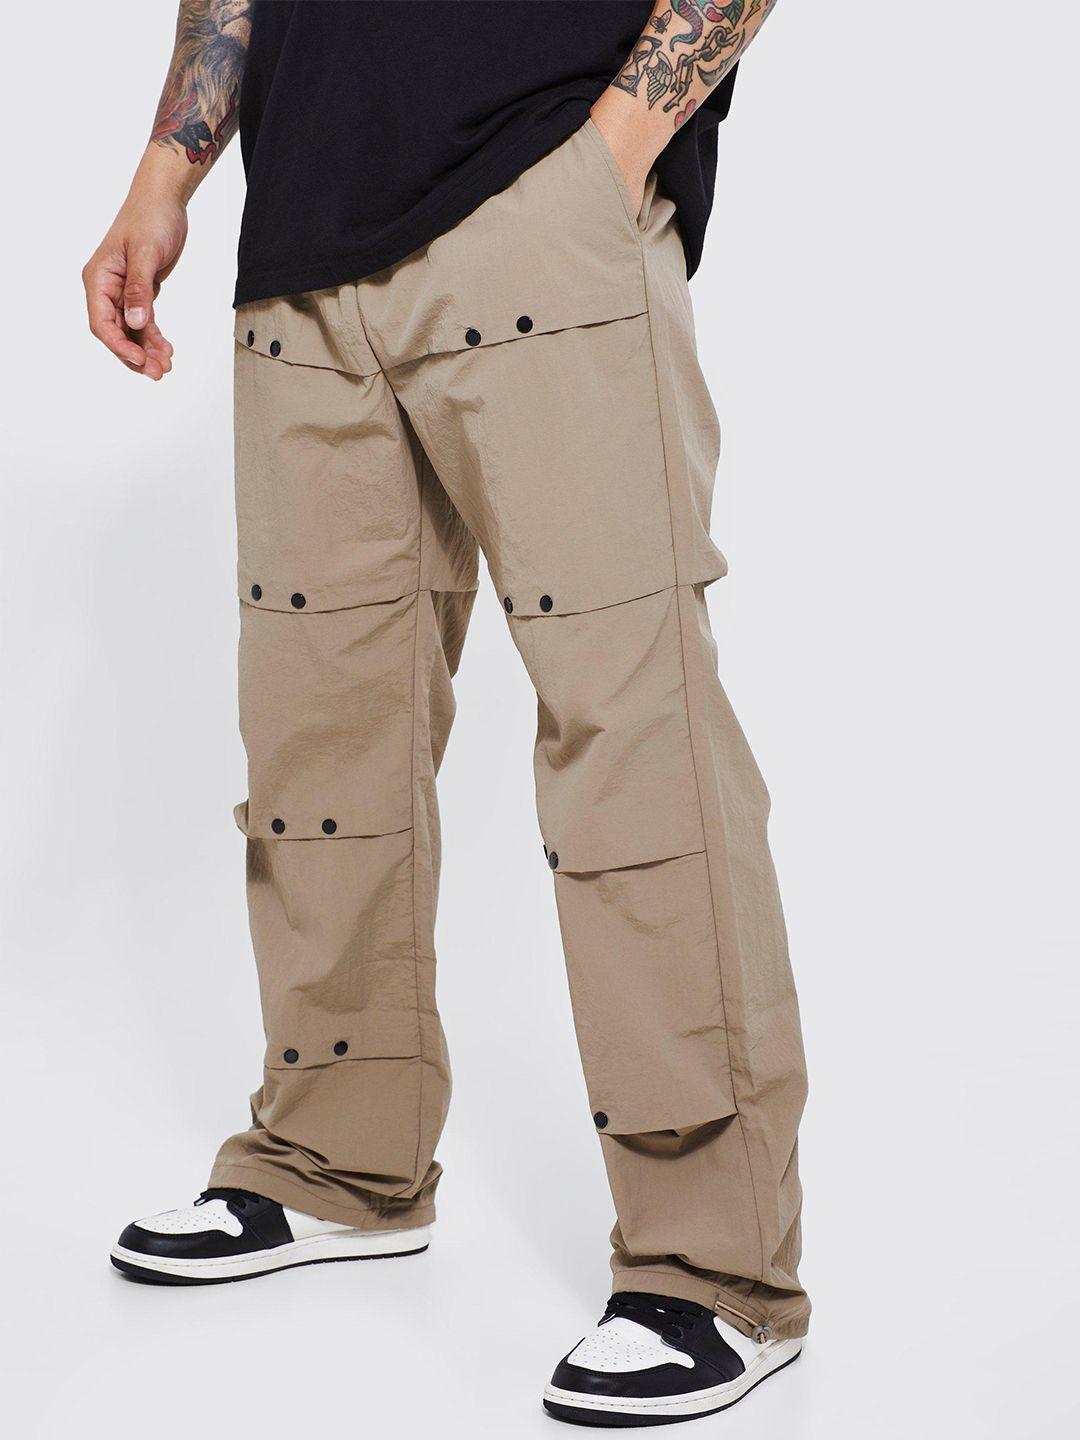 boohooman relaxed notched rivet detail trouser